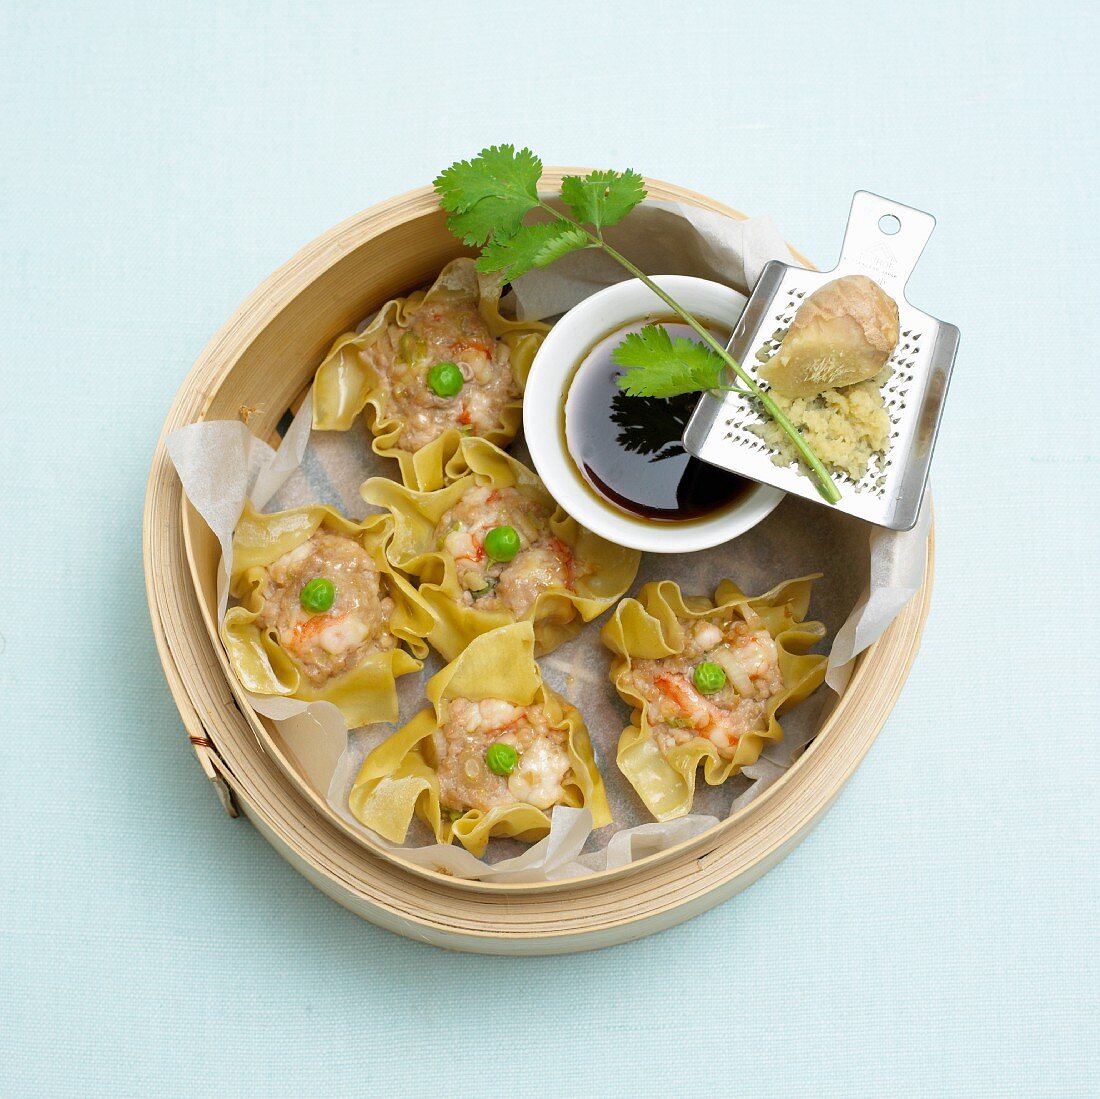 Ravioli filled with chicken, prawns, soy sauce and ginger (Asia)